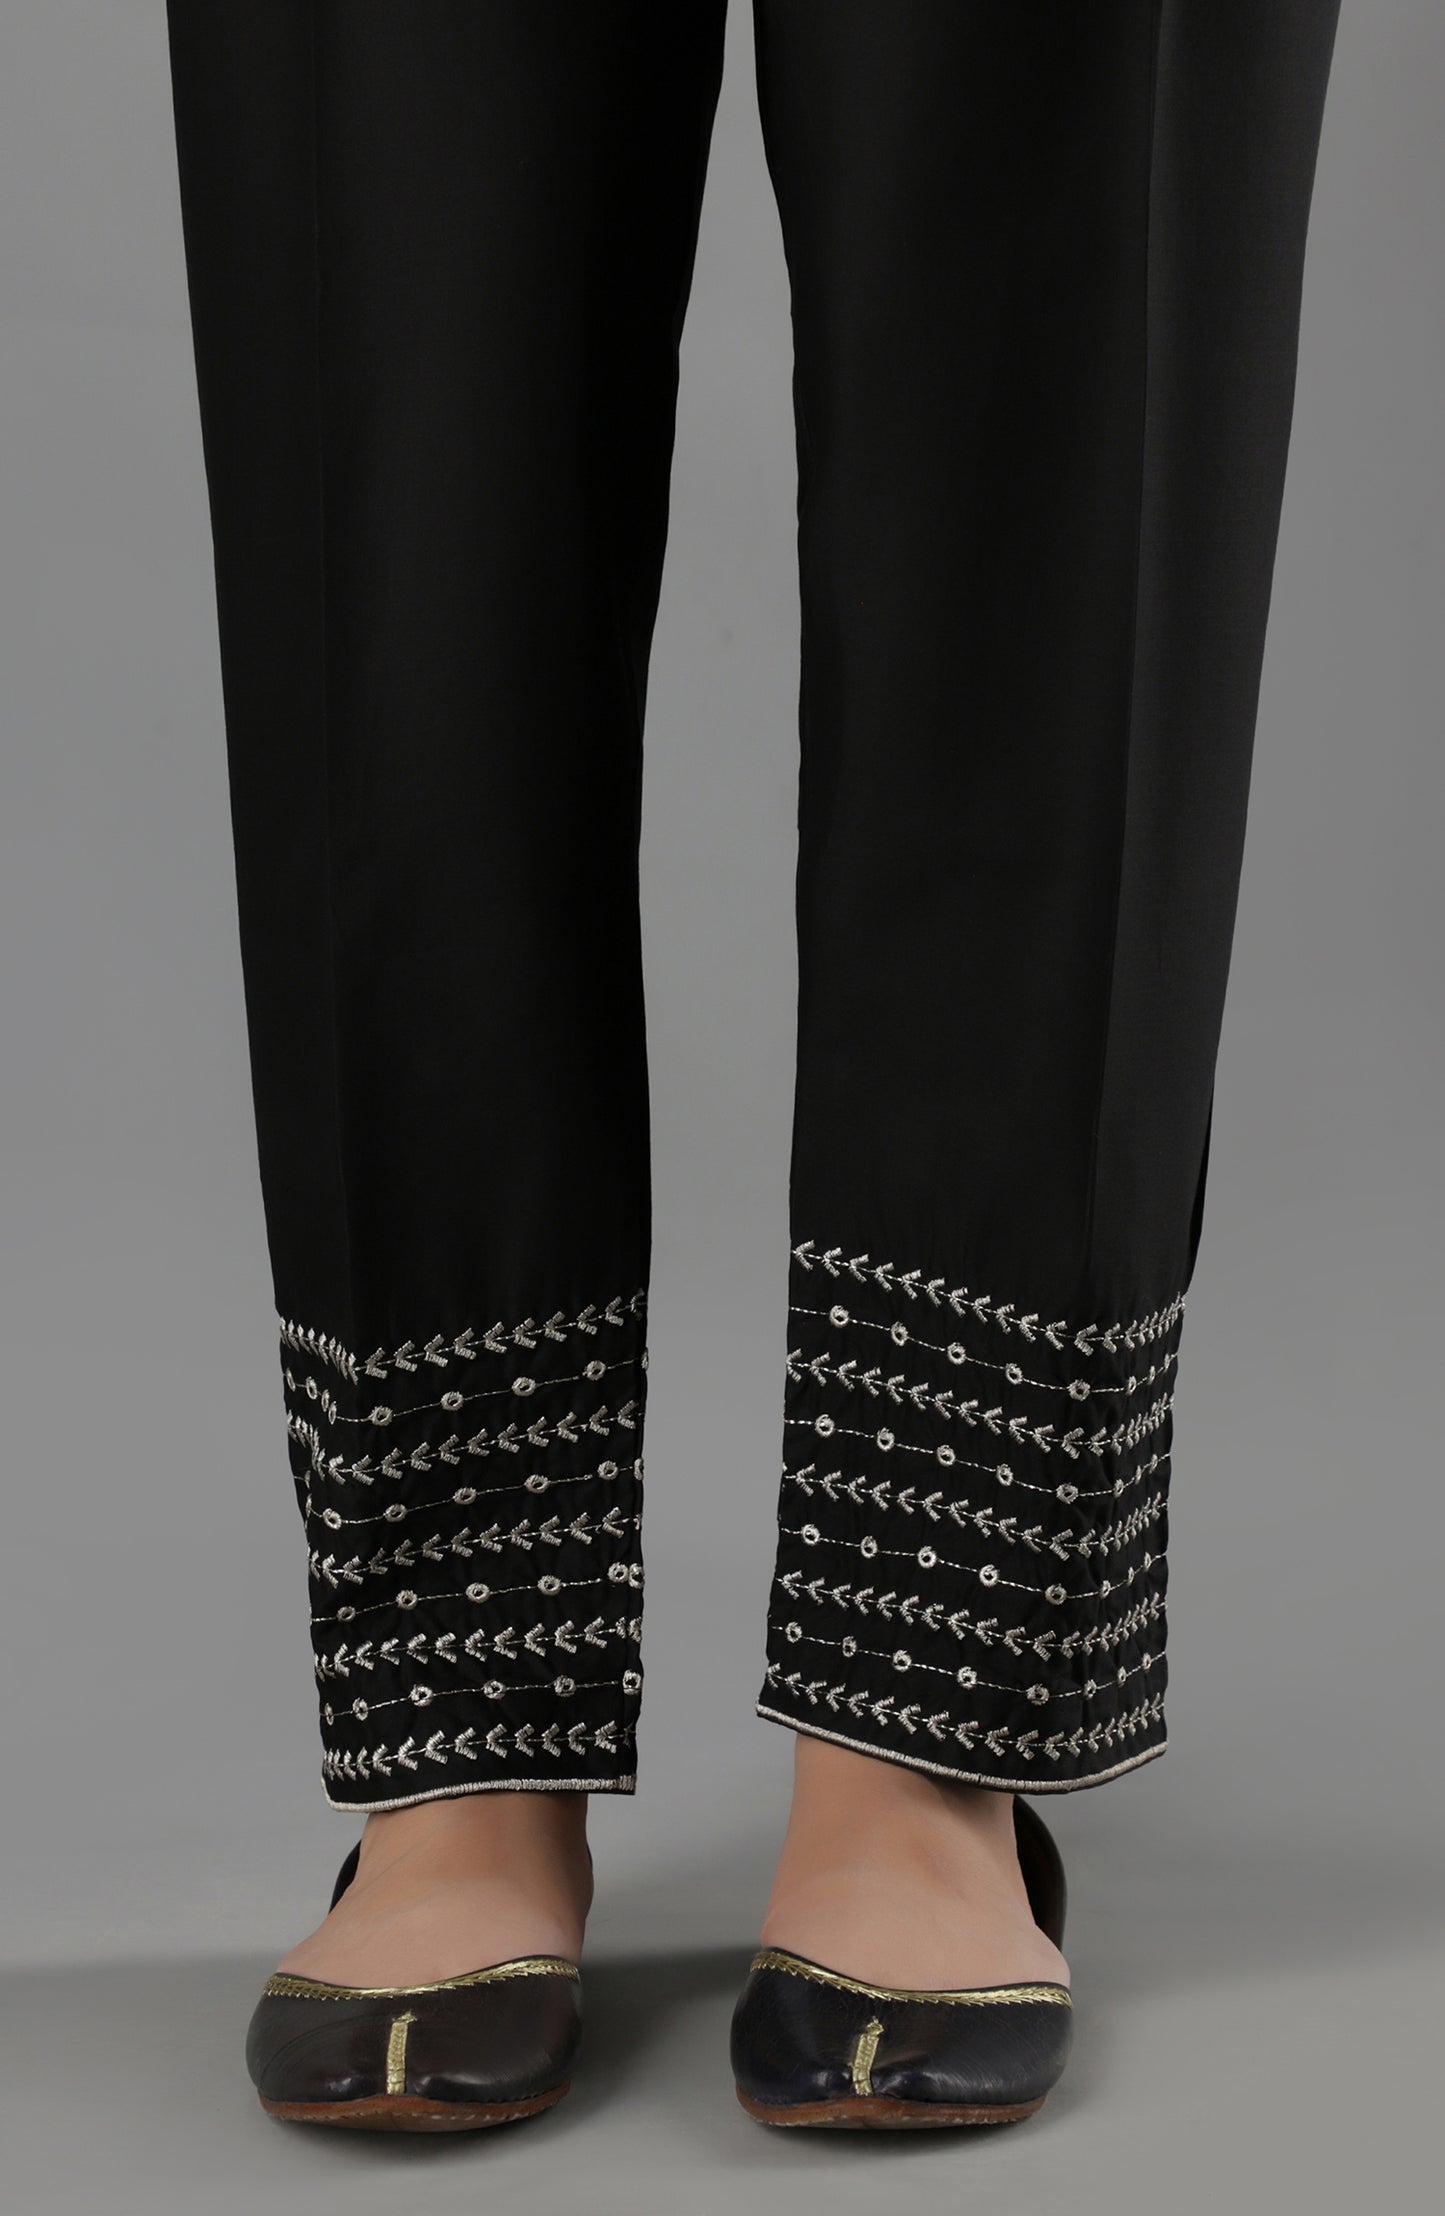 Stitched Bottoms 1 Piece Embroidered Cambric Pants (NRPE-49/S BLACK)